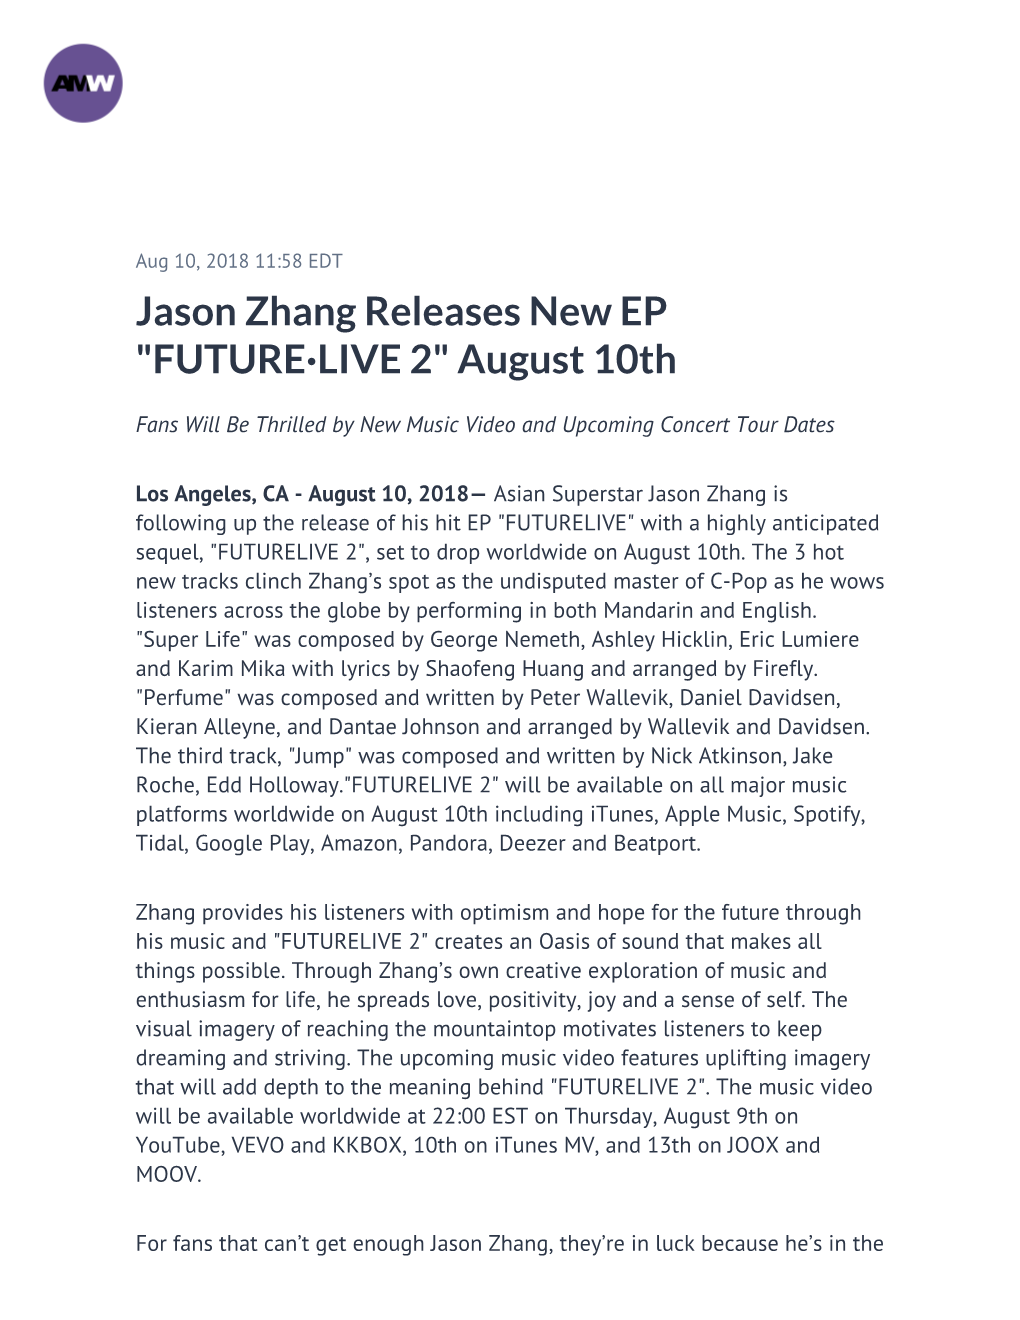 Jason Zhang Releases New EP "FUTURE·LIVE 2" August 10Th